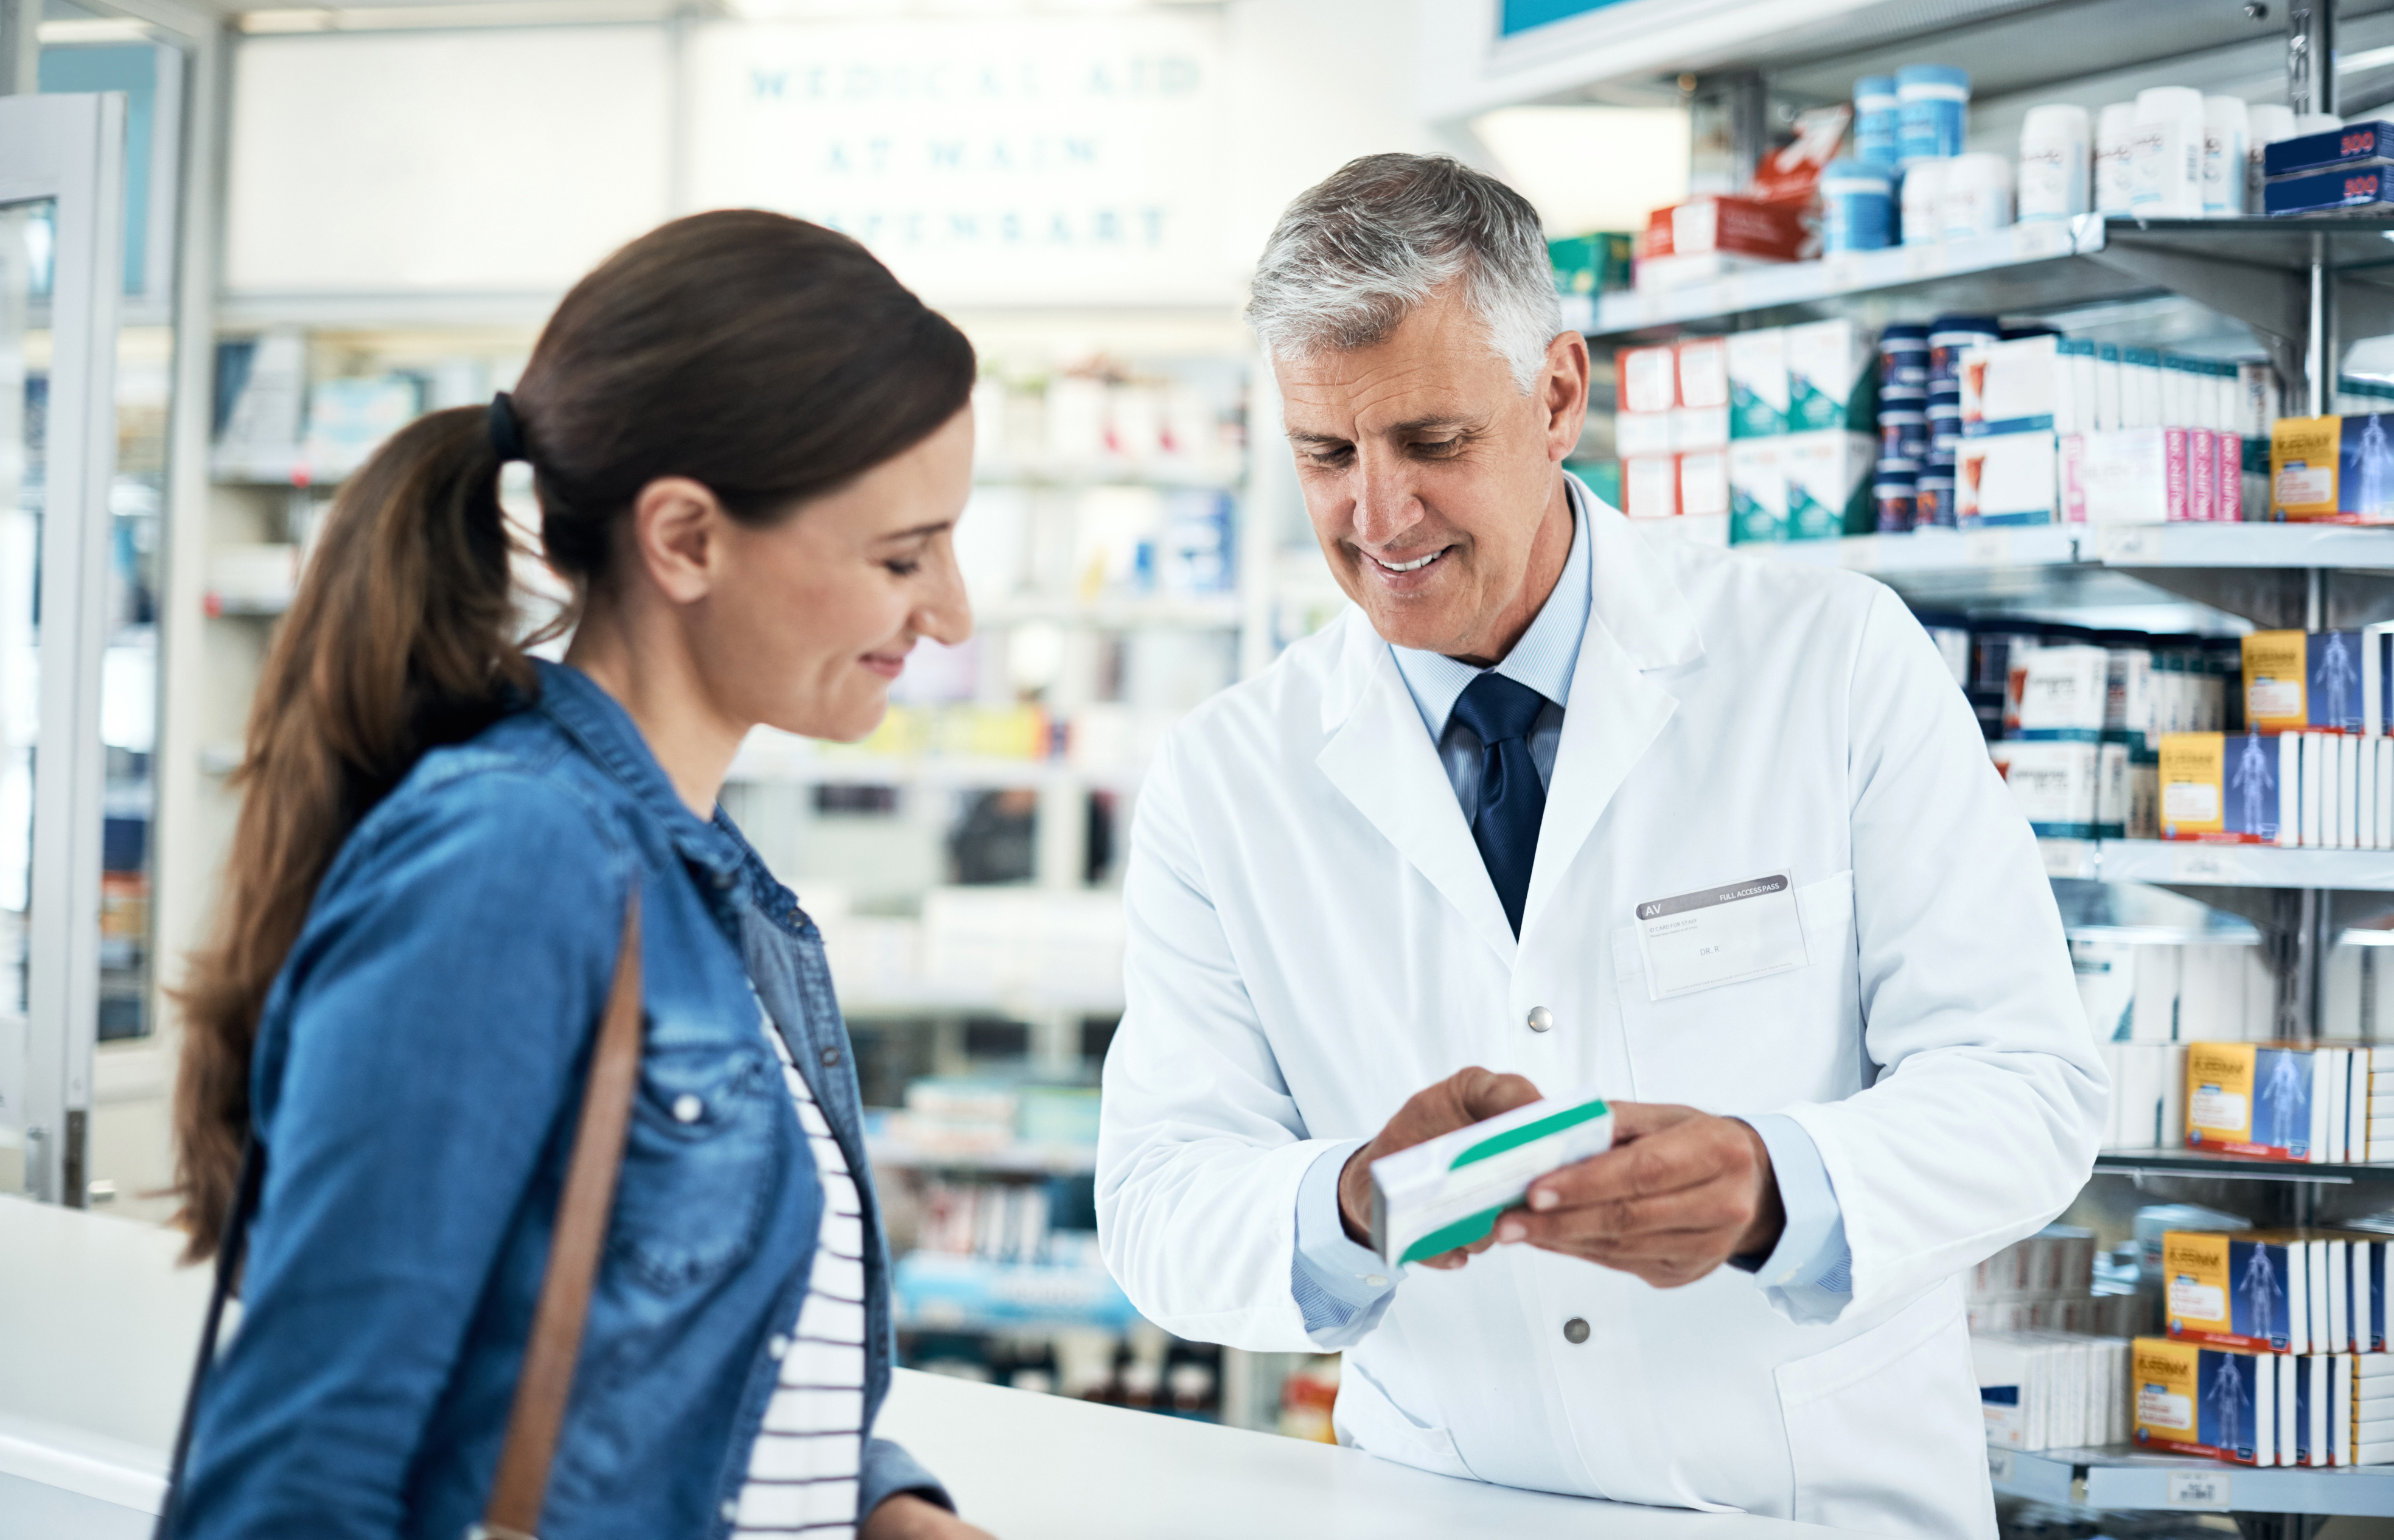 Canada Health Infoway and Loblaw Companies Limited Reach Agreement to Advance e-Prescribing